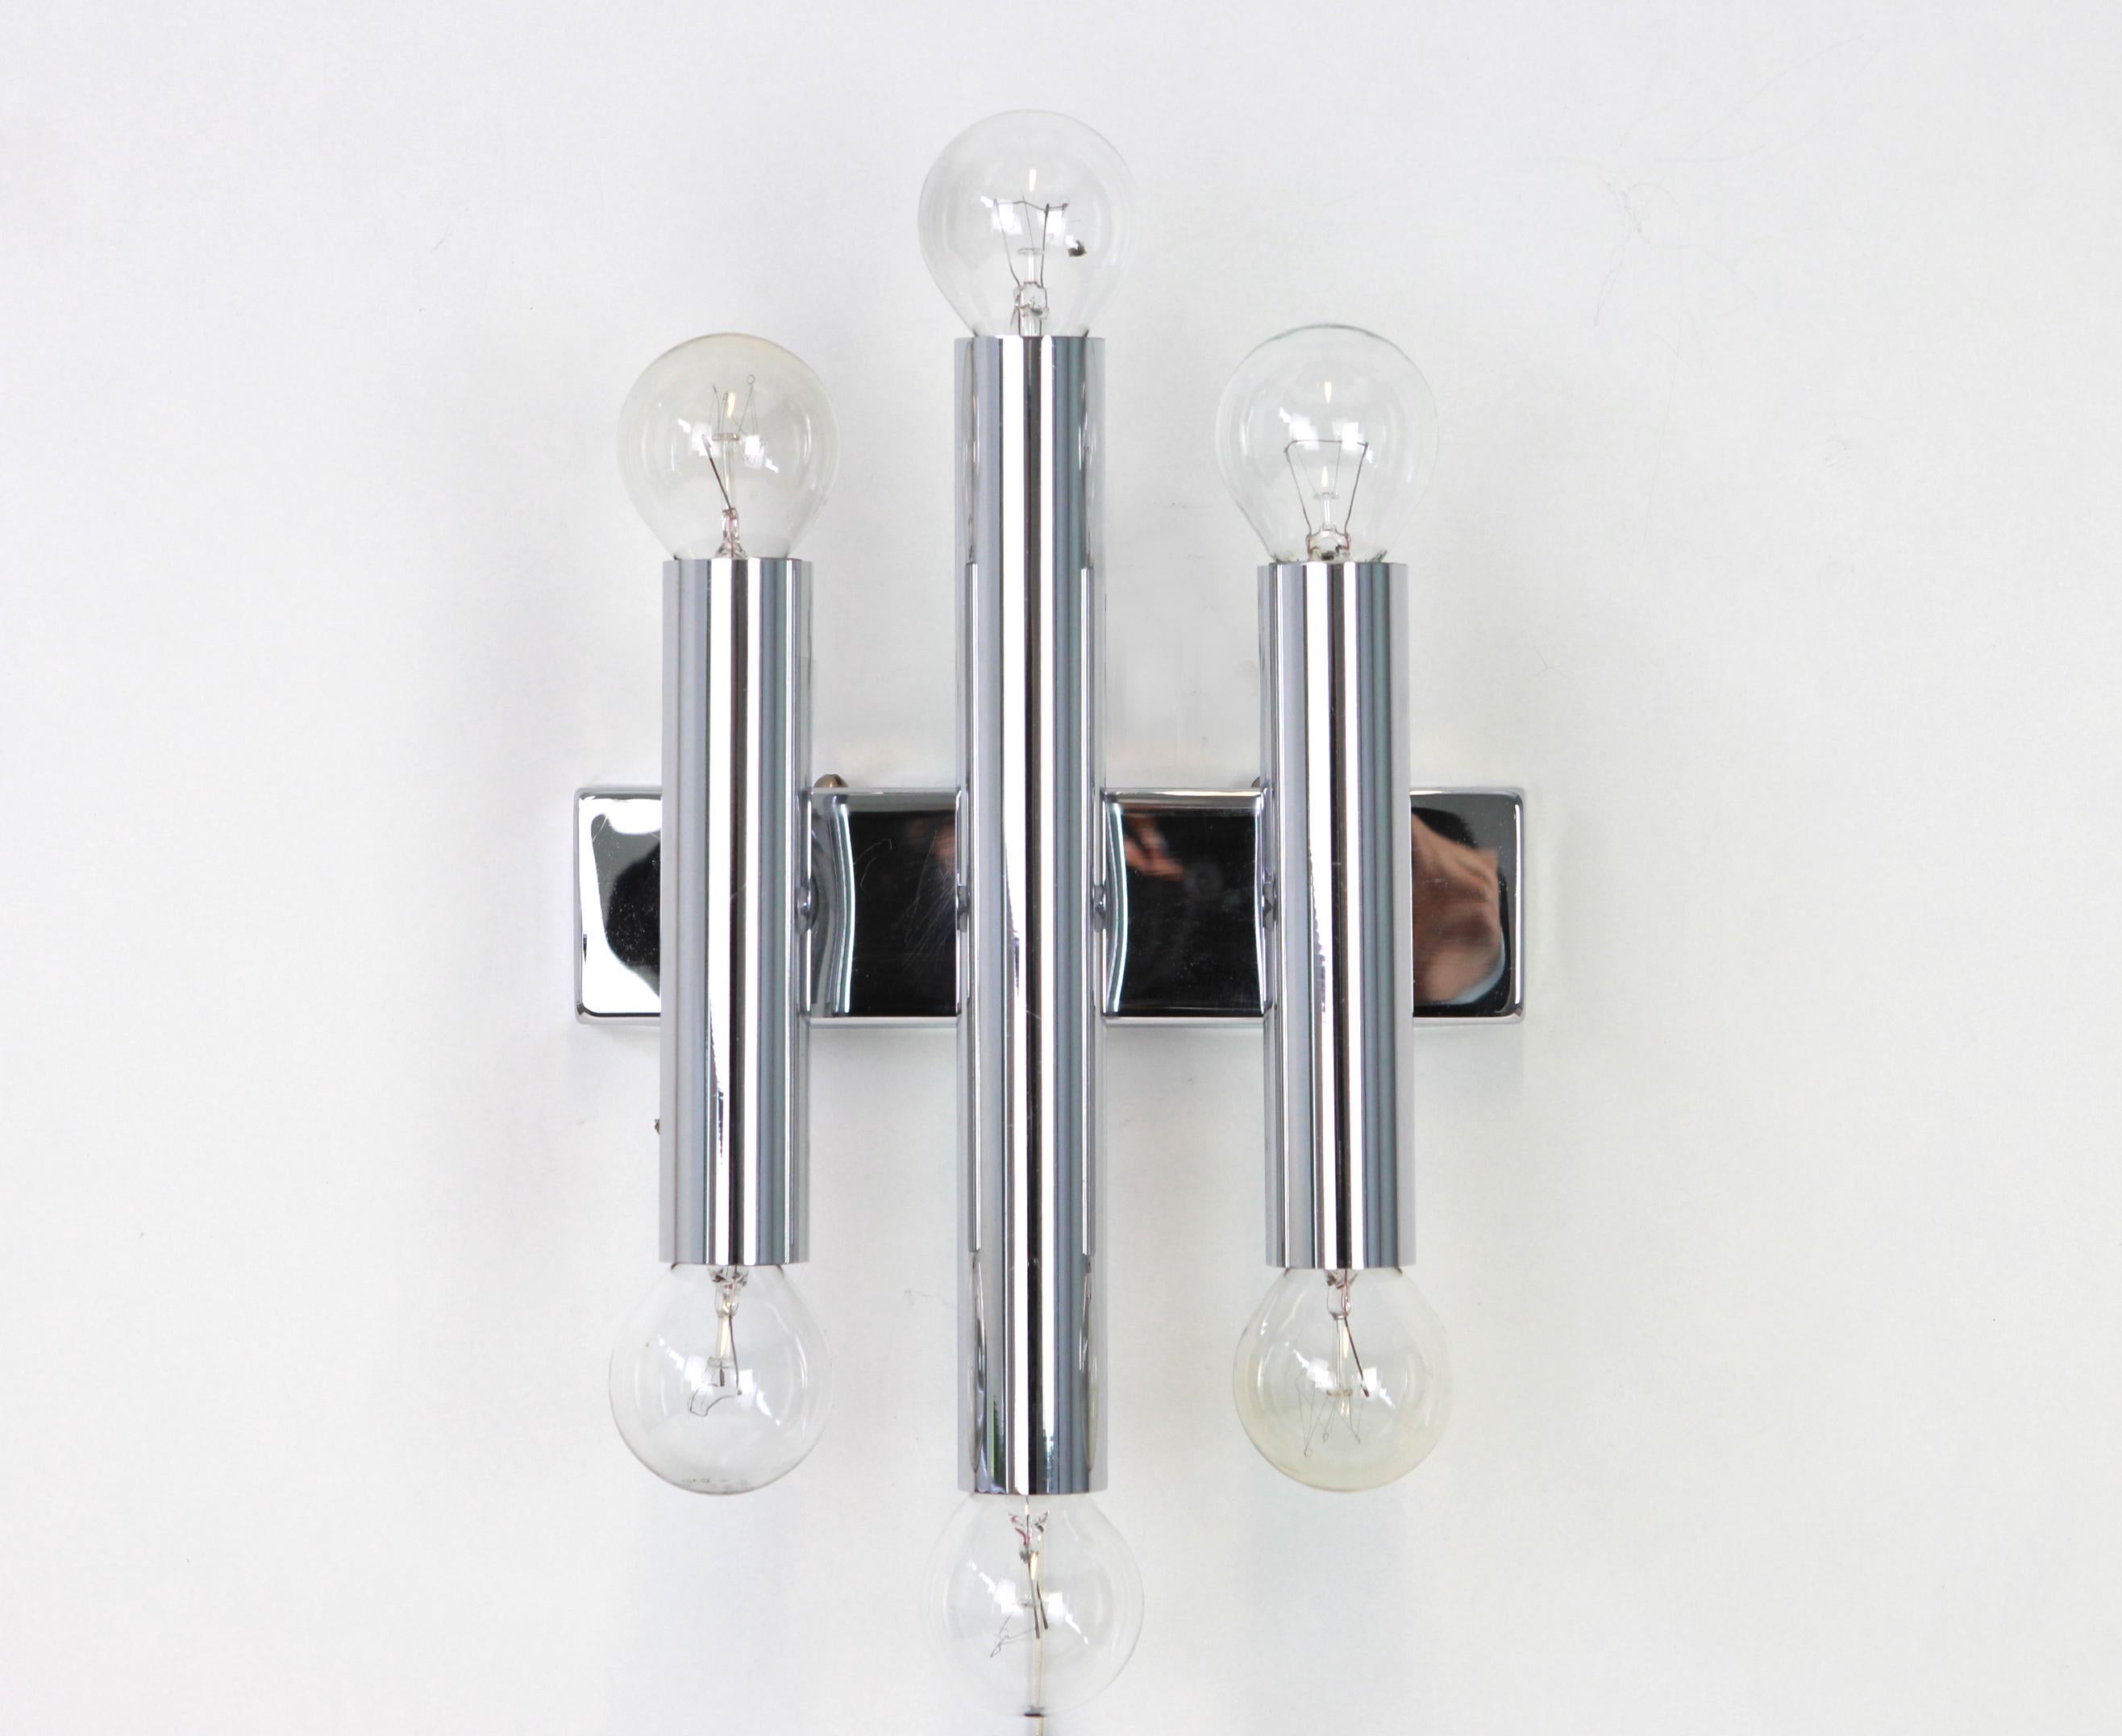 Pair of Italian chrome wall sconces Sciolari style, 1970s
each wall light needs 6 x E14 small bulb.
Dimensions:
Height approximate 23 cm
Width 20 cm
Depth 10 cm
Good condition.
Please note that the listed price is for the pair.
  